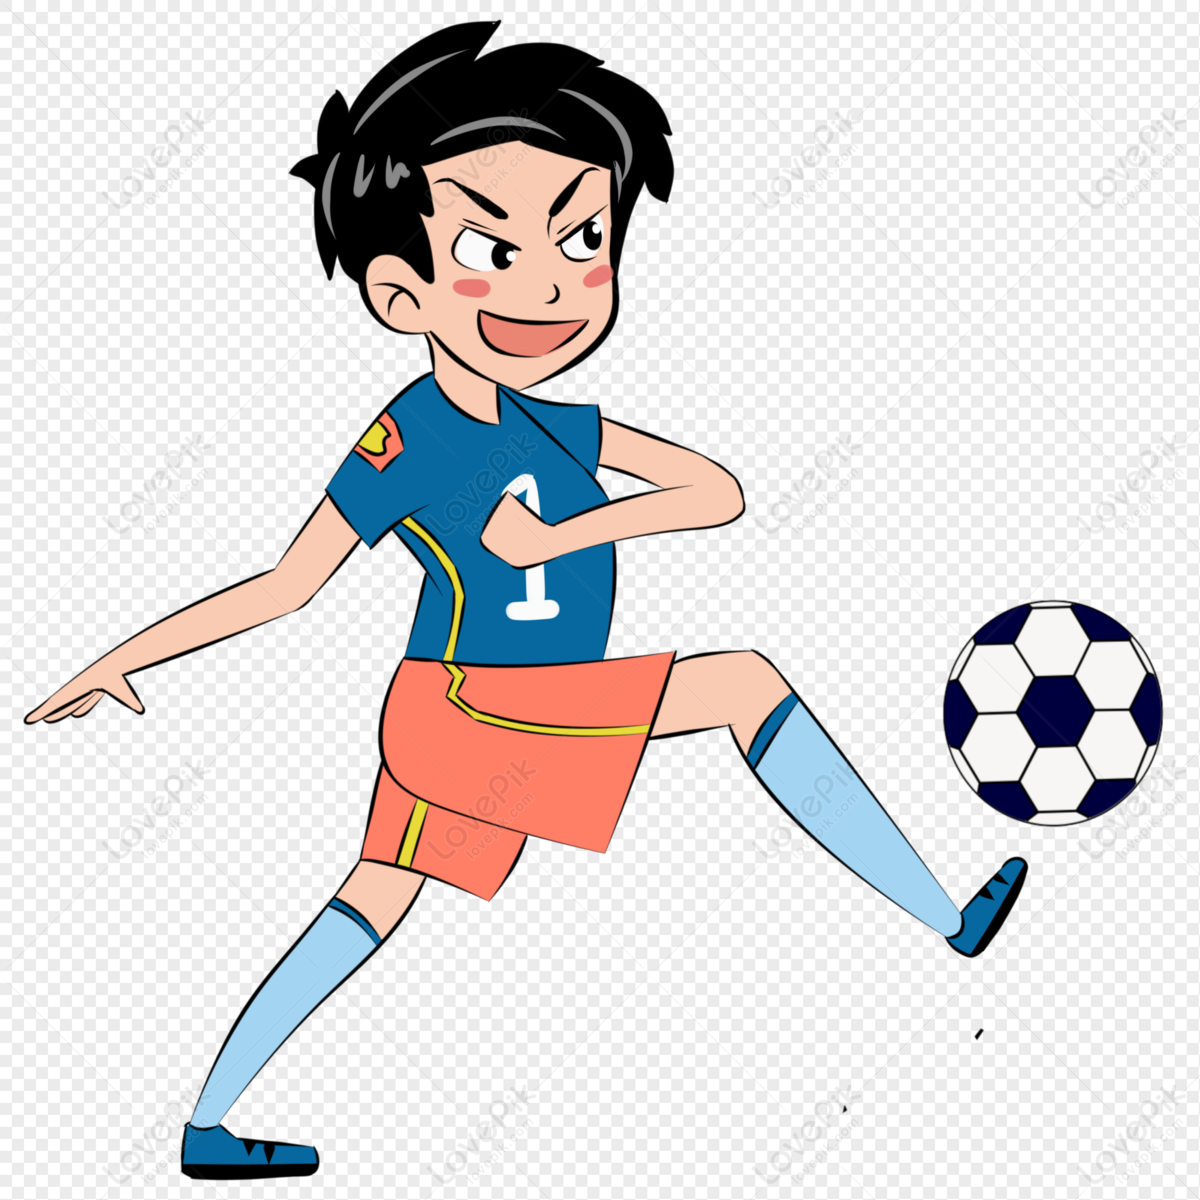 Football Player Cartoon Elements Hand Drawn PNG Image Free Download And  Clipart Image For Free Download - Lovepik | 401403341